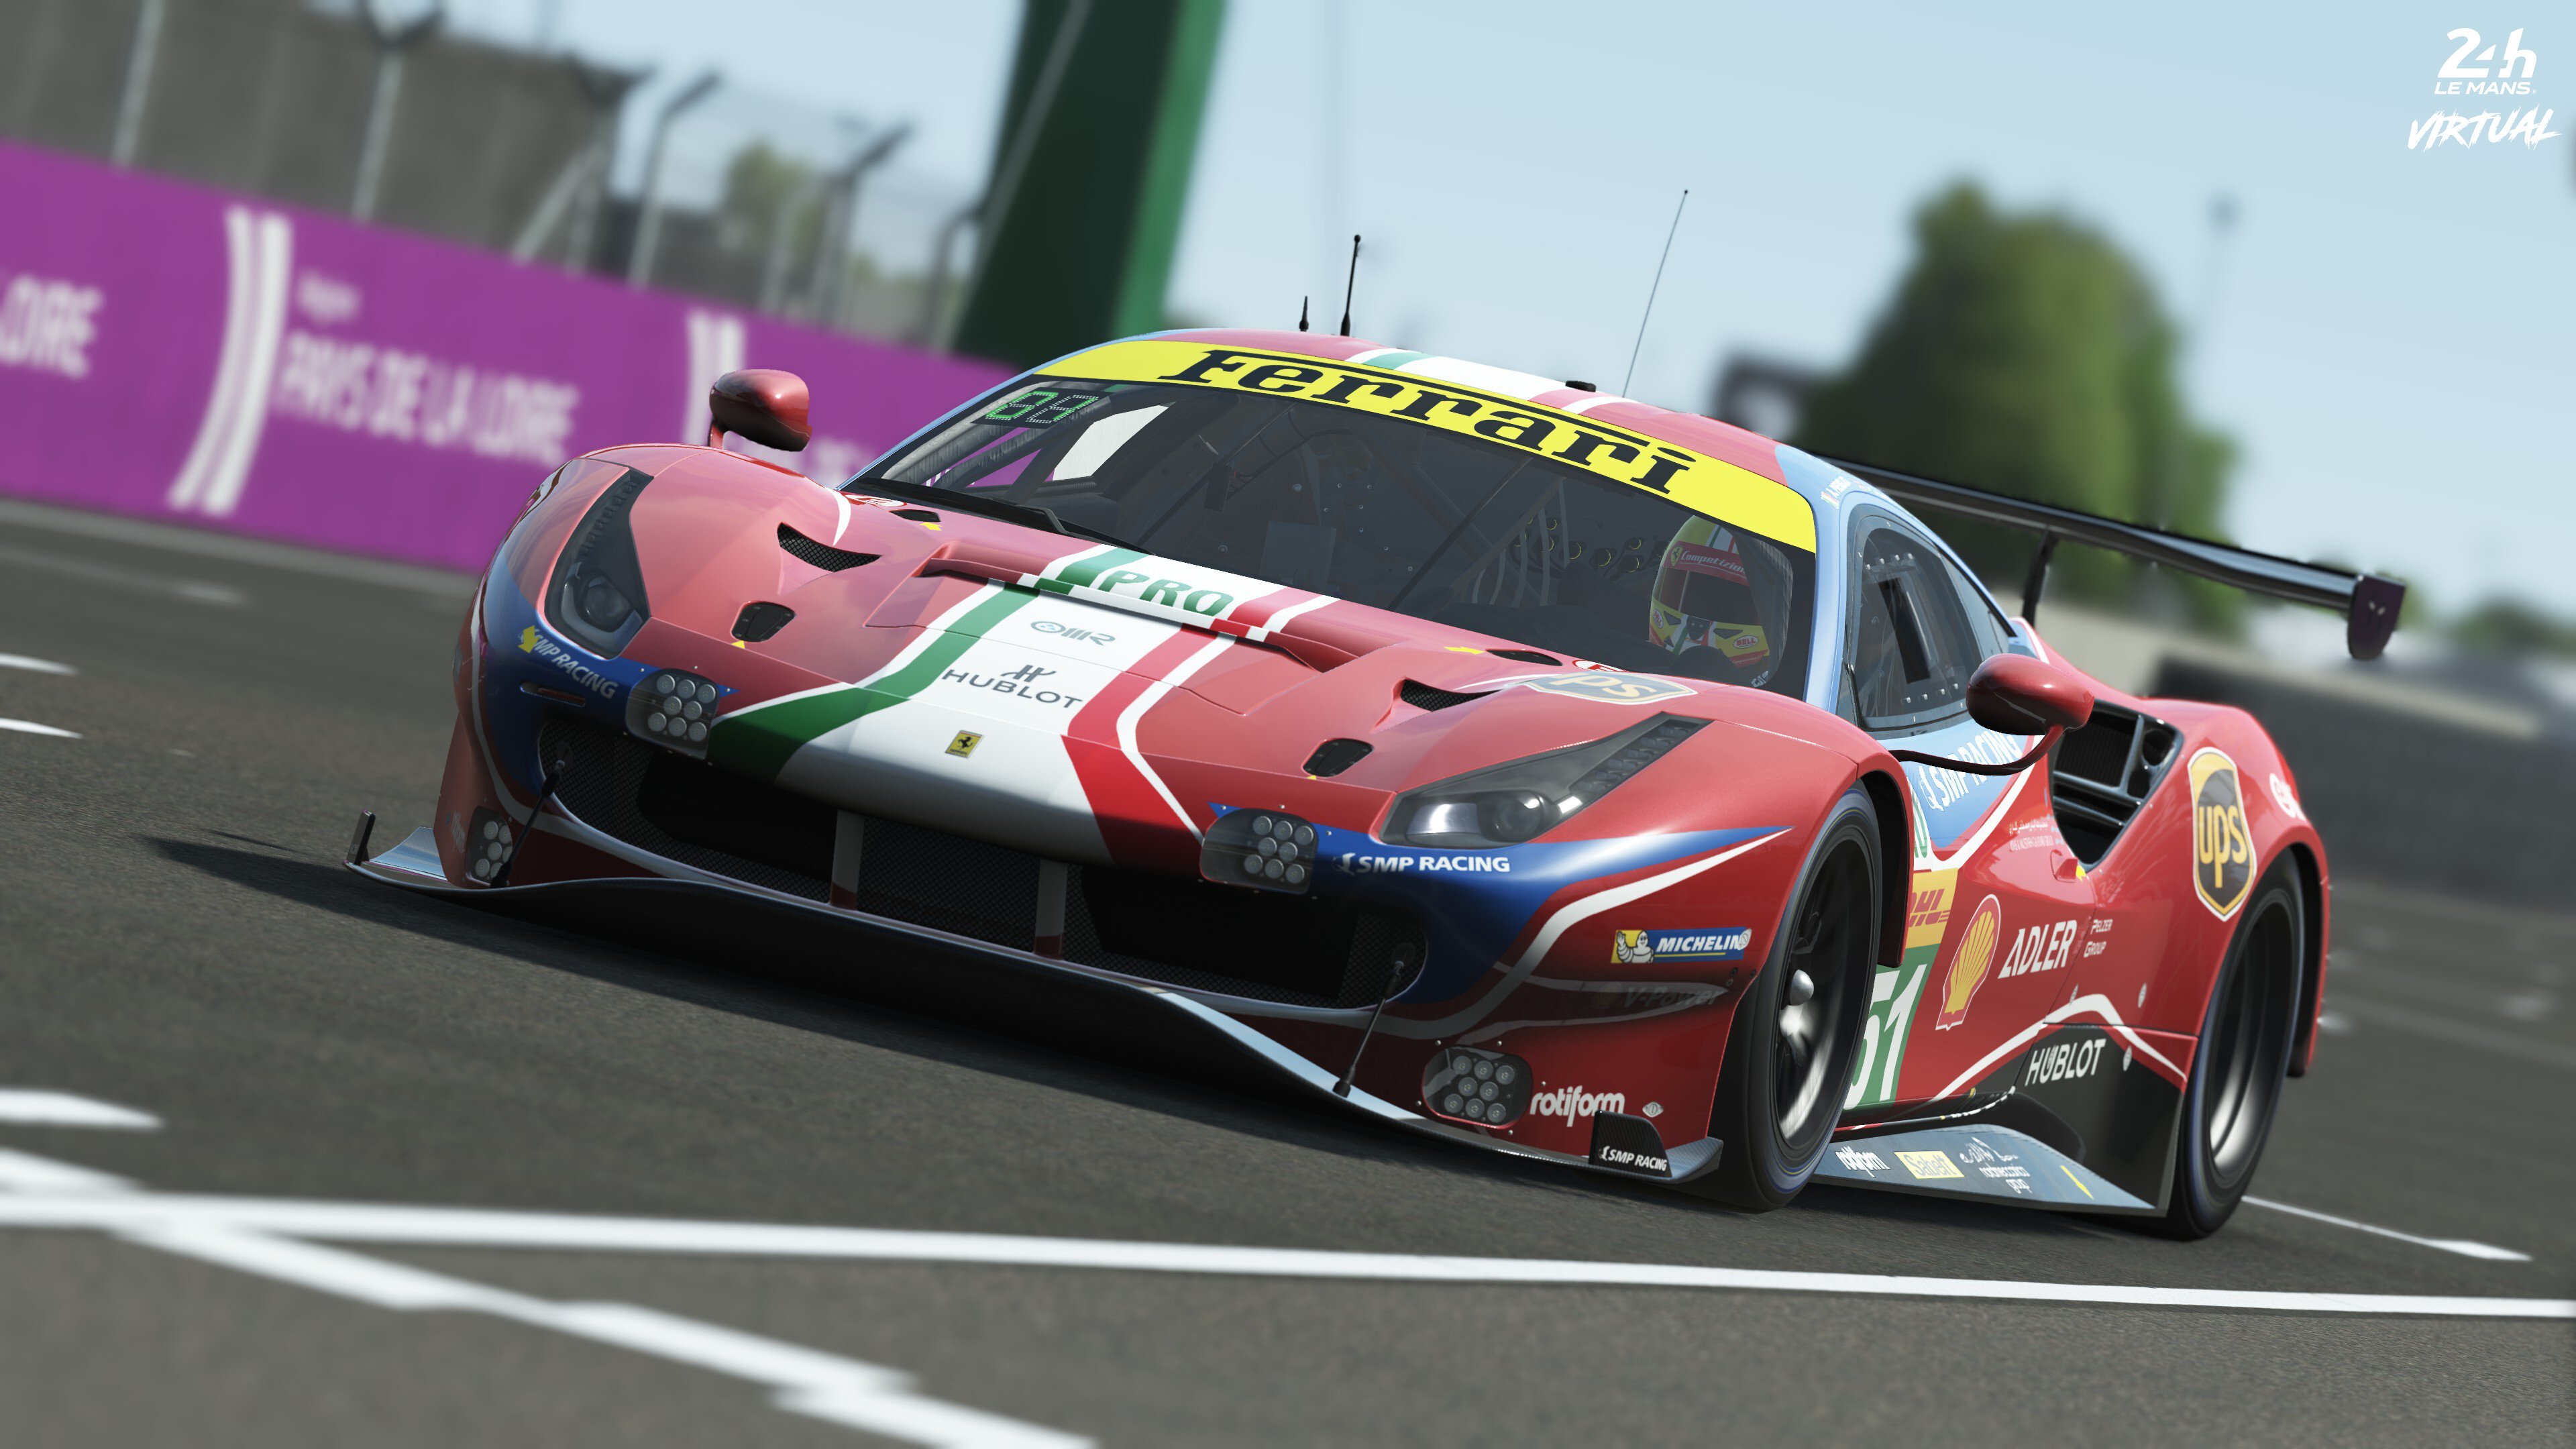 More information about "Annunciata la 24 Hours of Le Mans Virtual con rFactor 2"